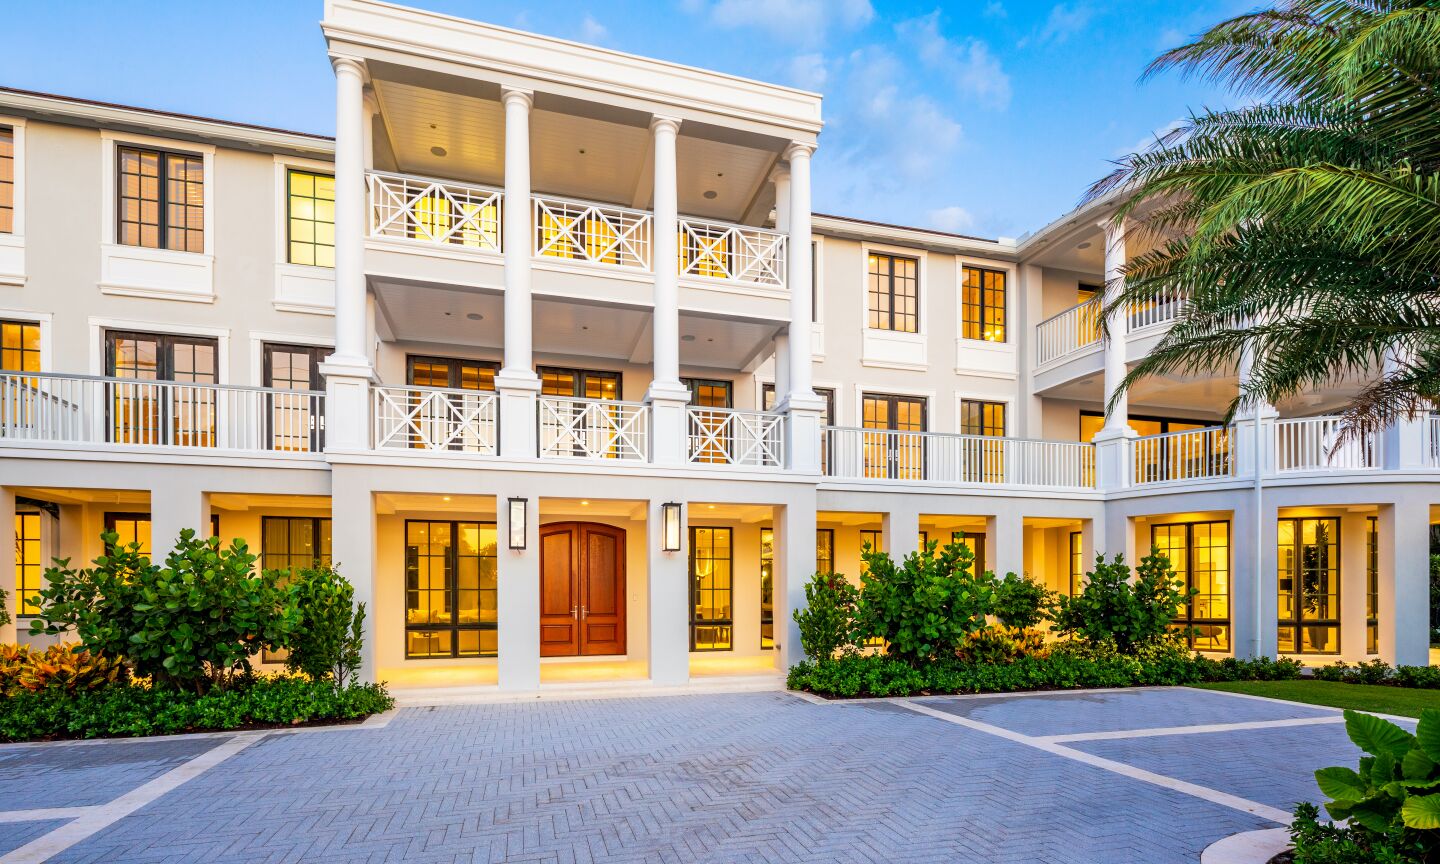 The newly built coastal estate includes a three-story mansion and one-bedroom guesthouse that combine for nearly 19,000 square feet.